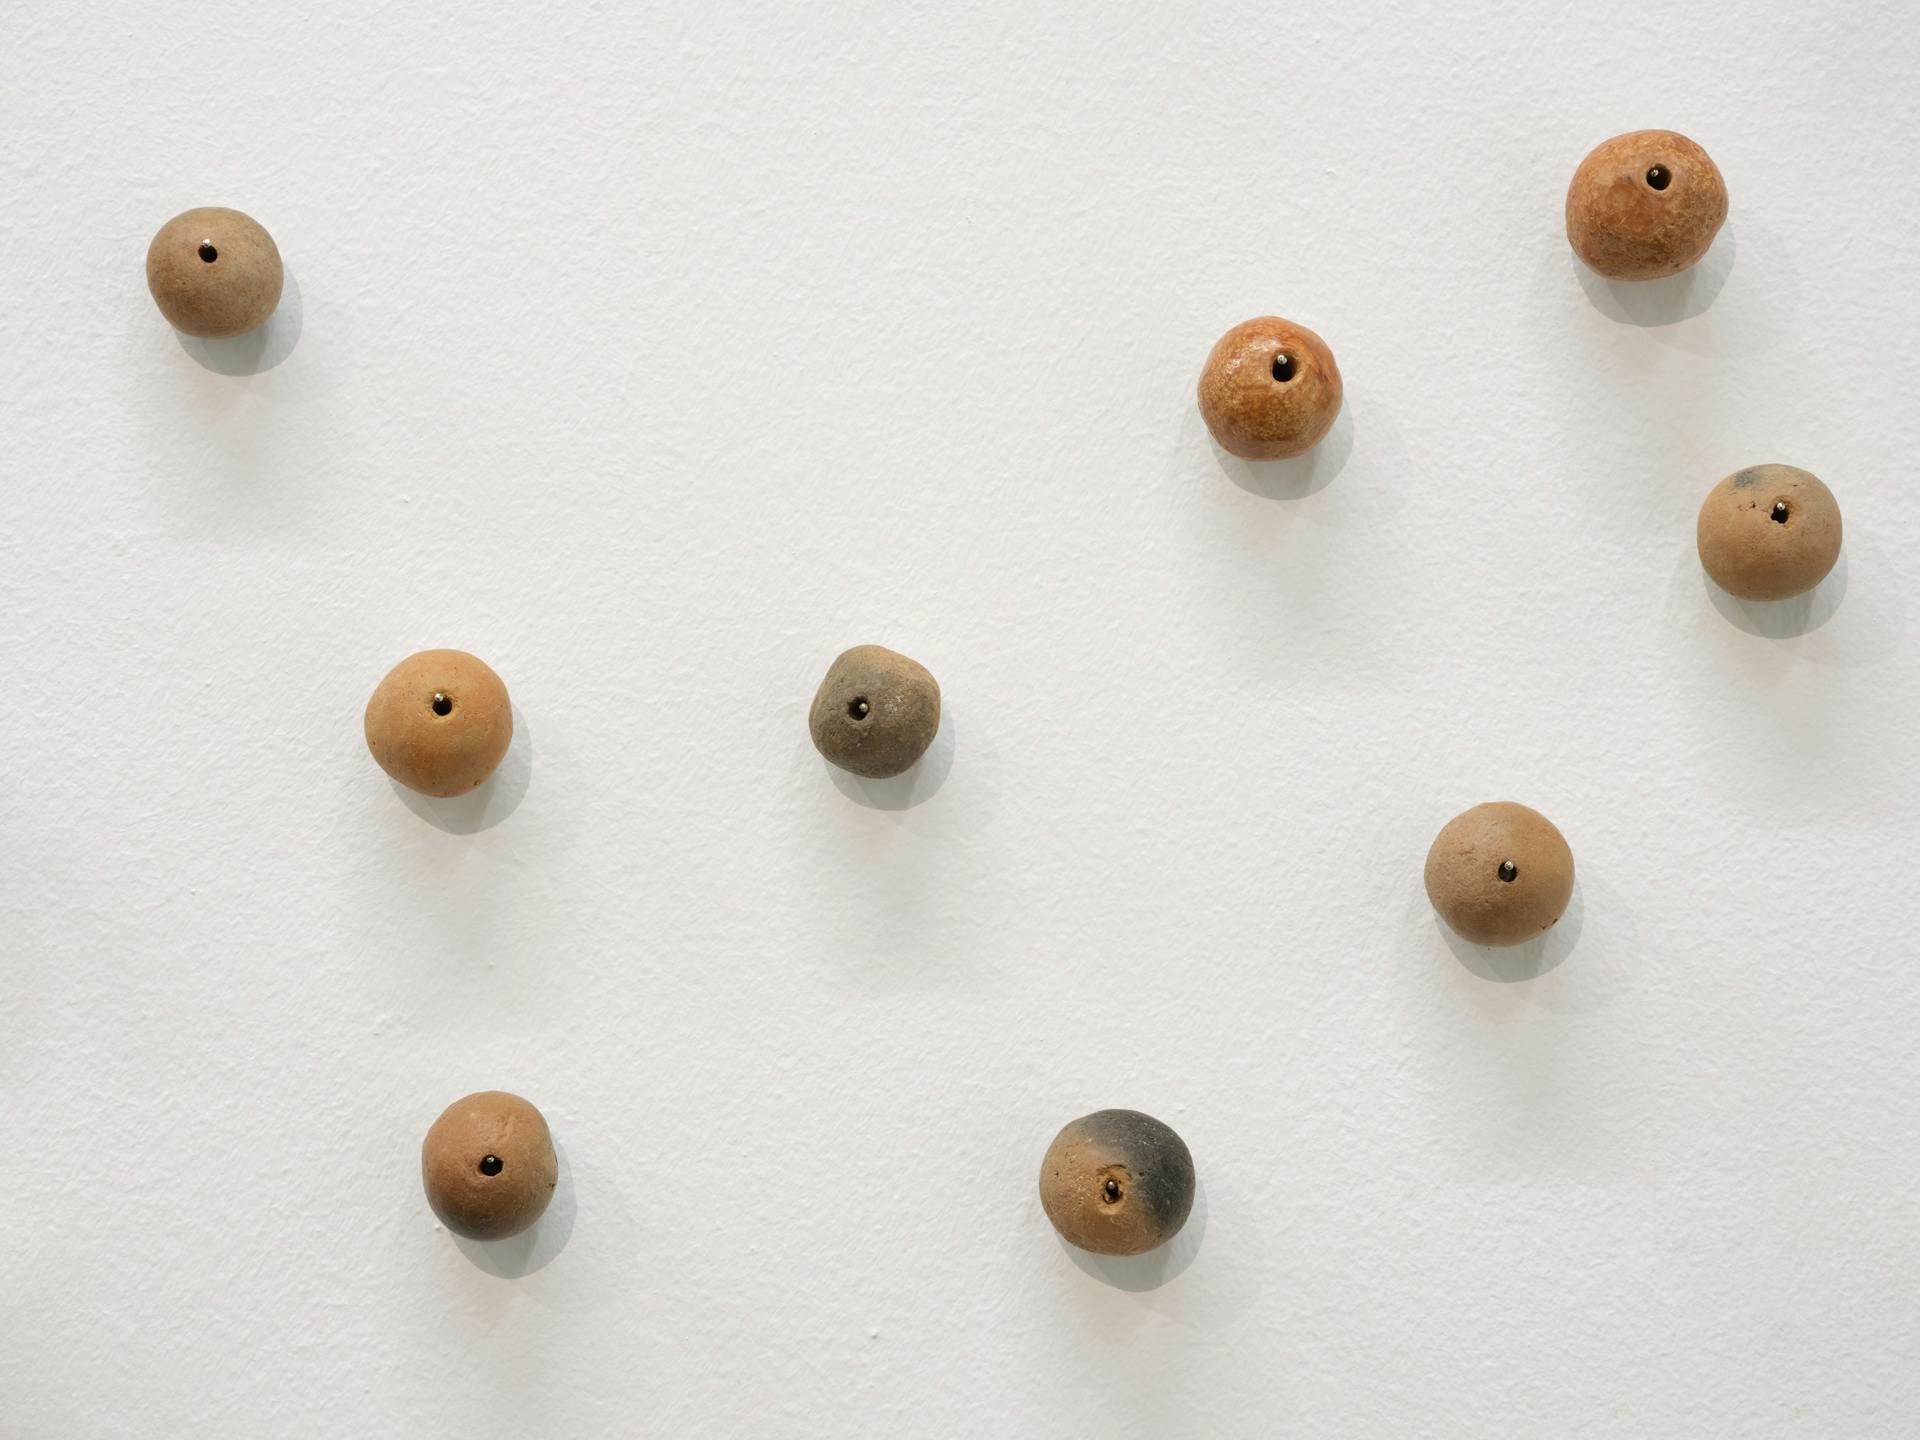 Detail of nine clay beads in orange and grey tones pinned to a white wall.